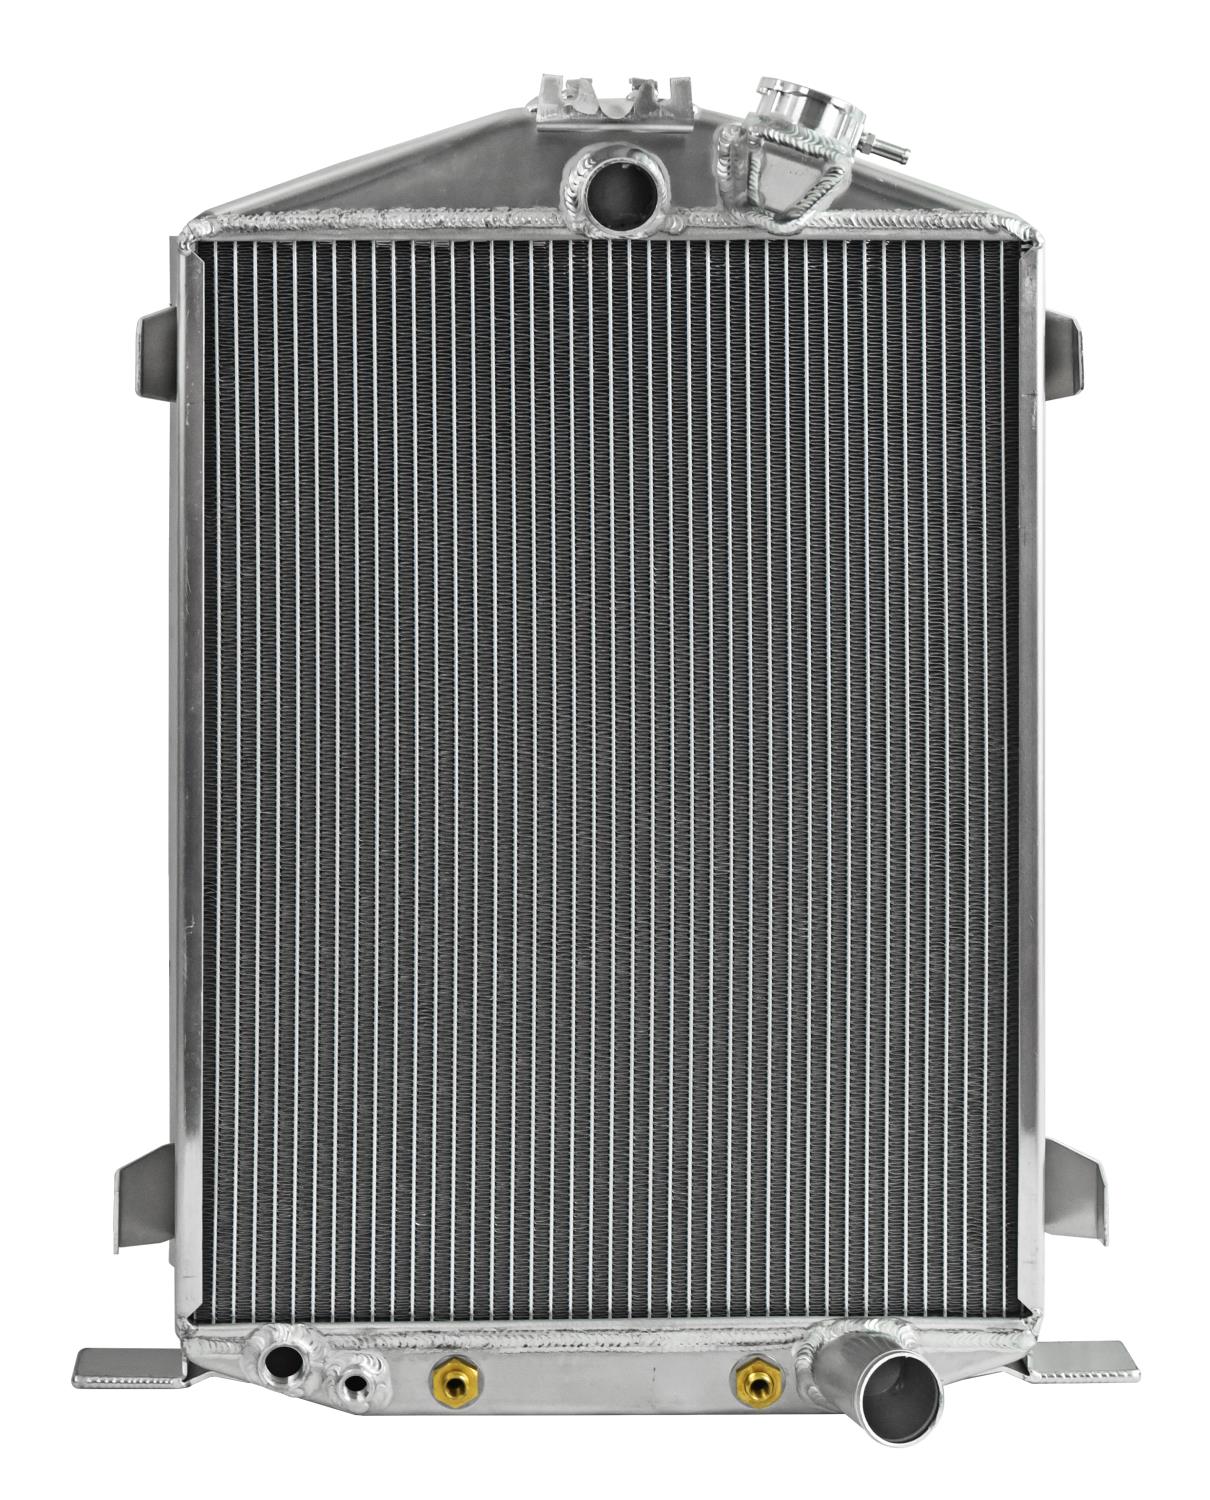 Aluminum Radiator for 1932 Ford HI-BOY with Chevy